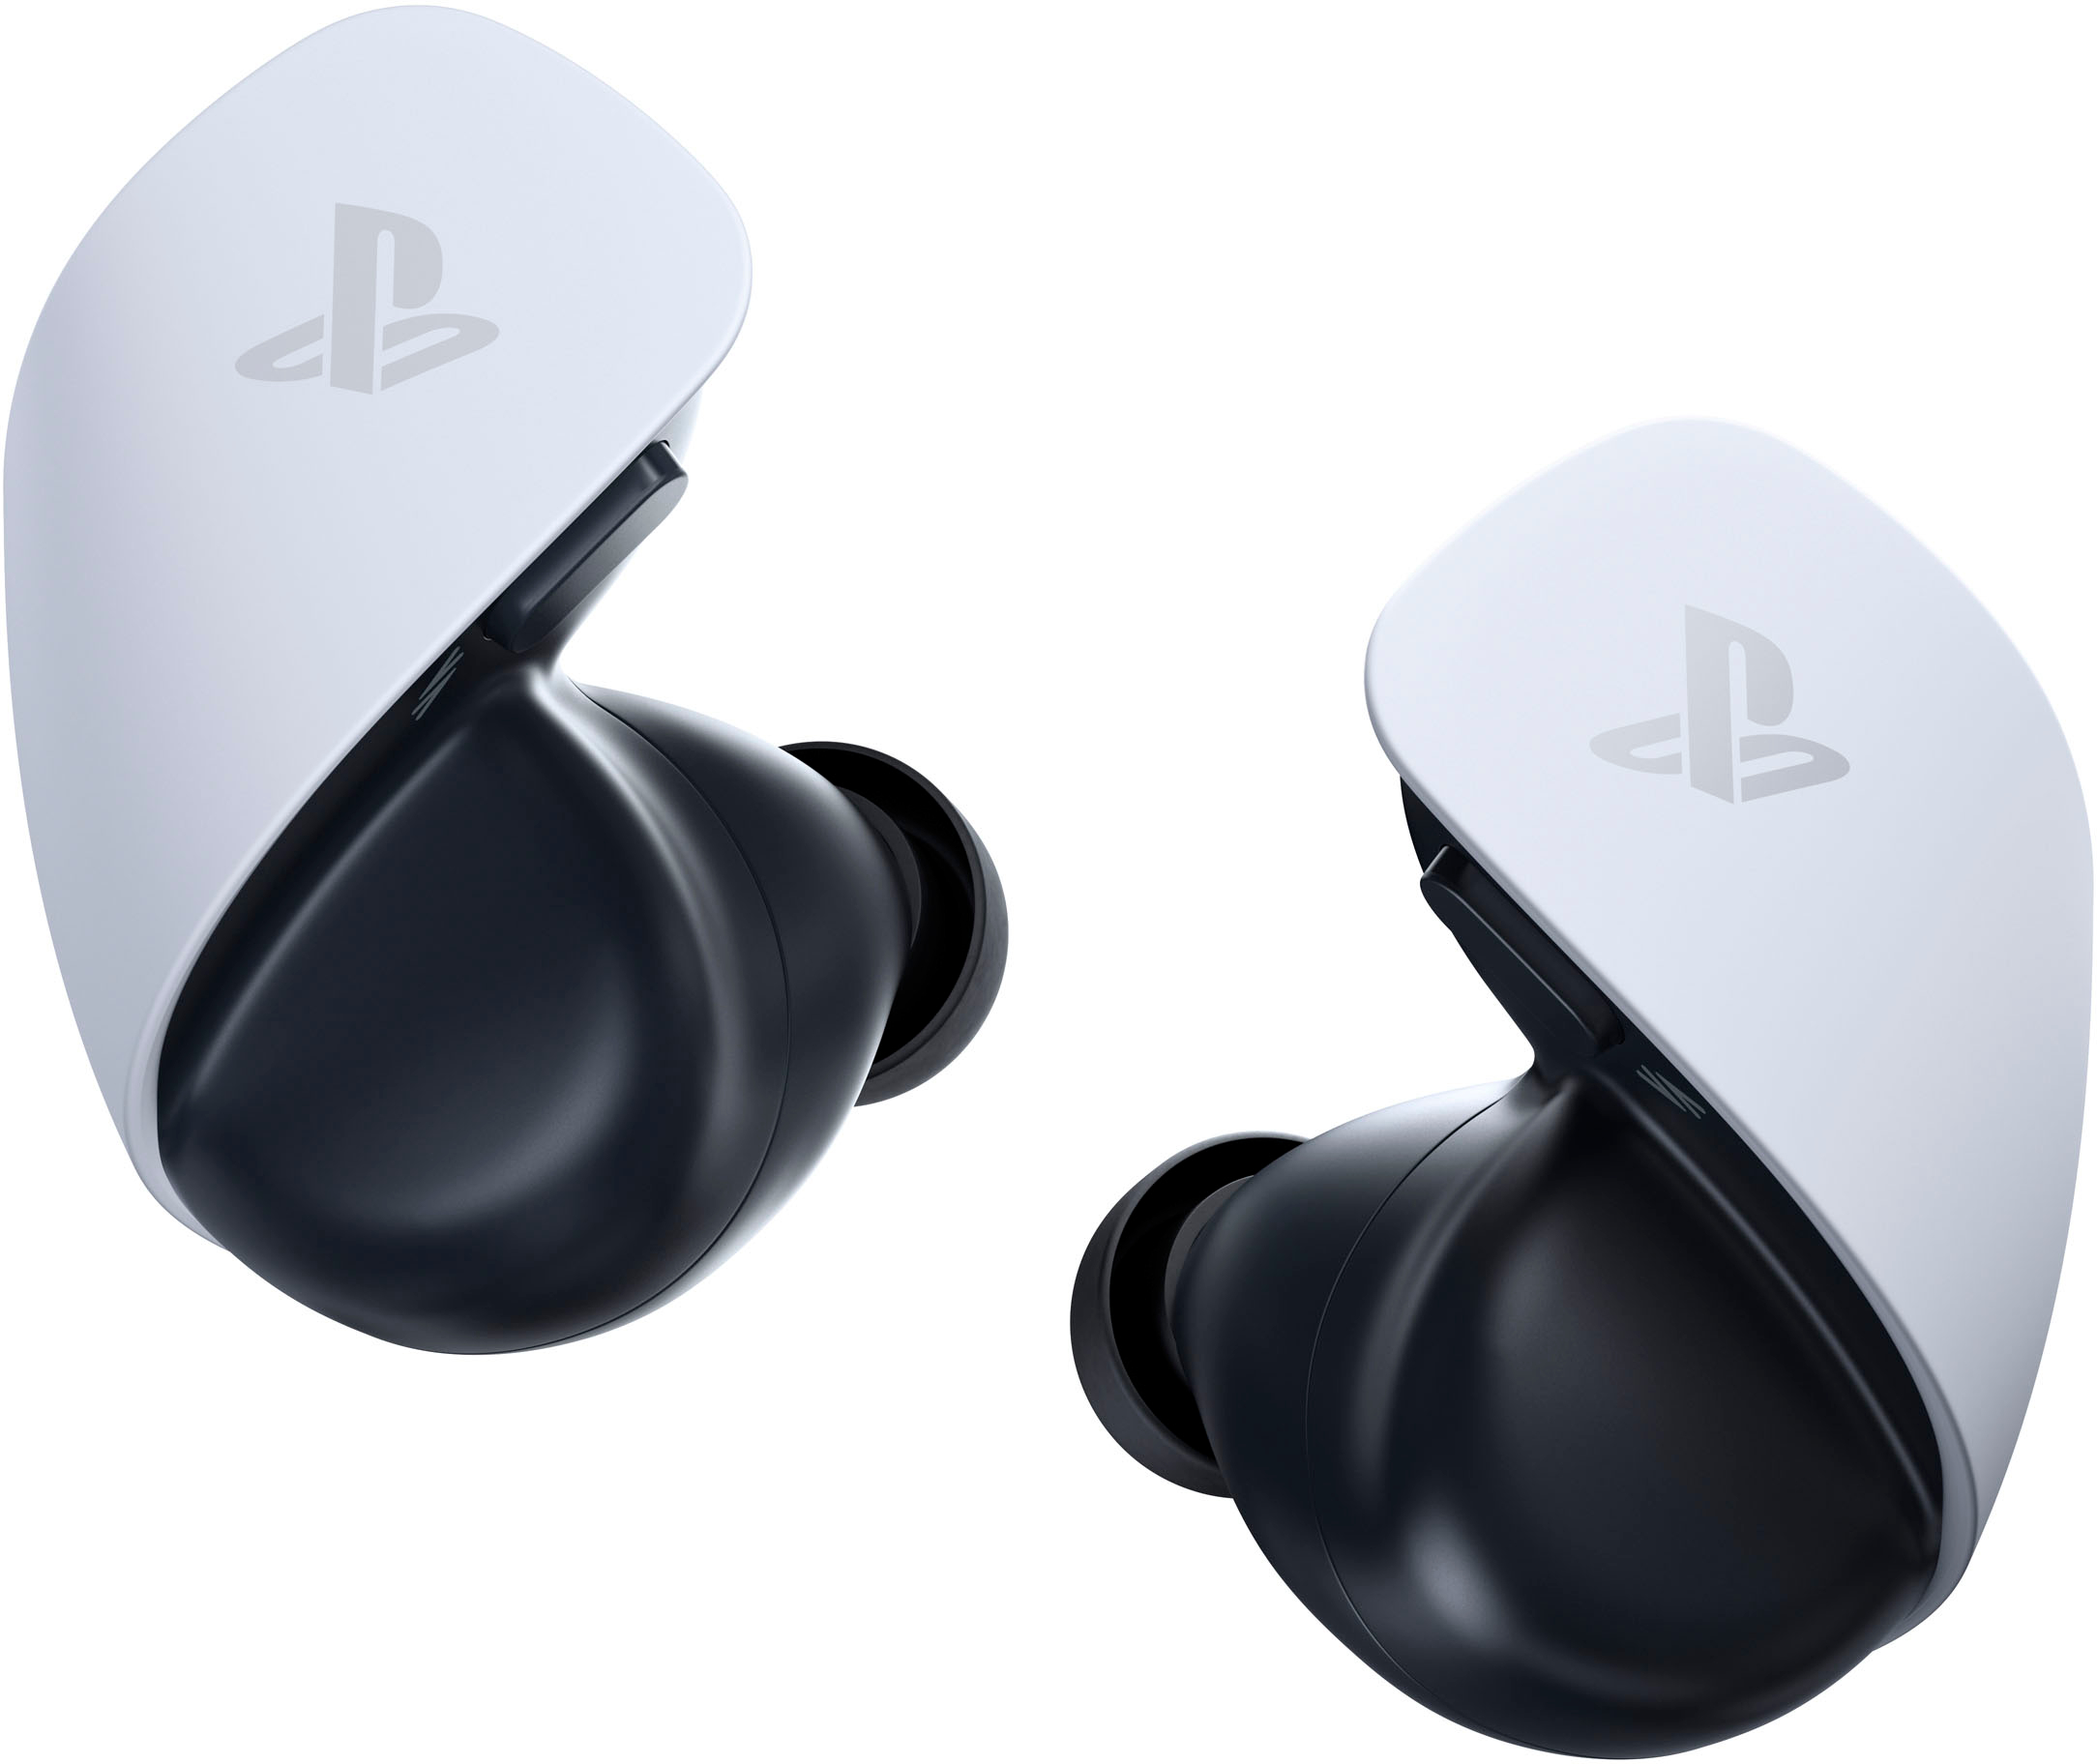 Sony INZONE Buds vs PS5 PULSE Explore: Gaming Earbuds Comparison